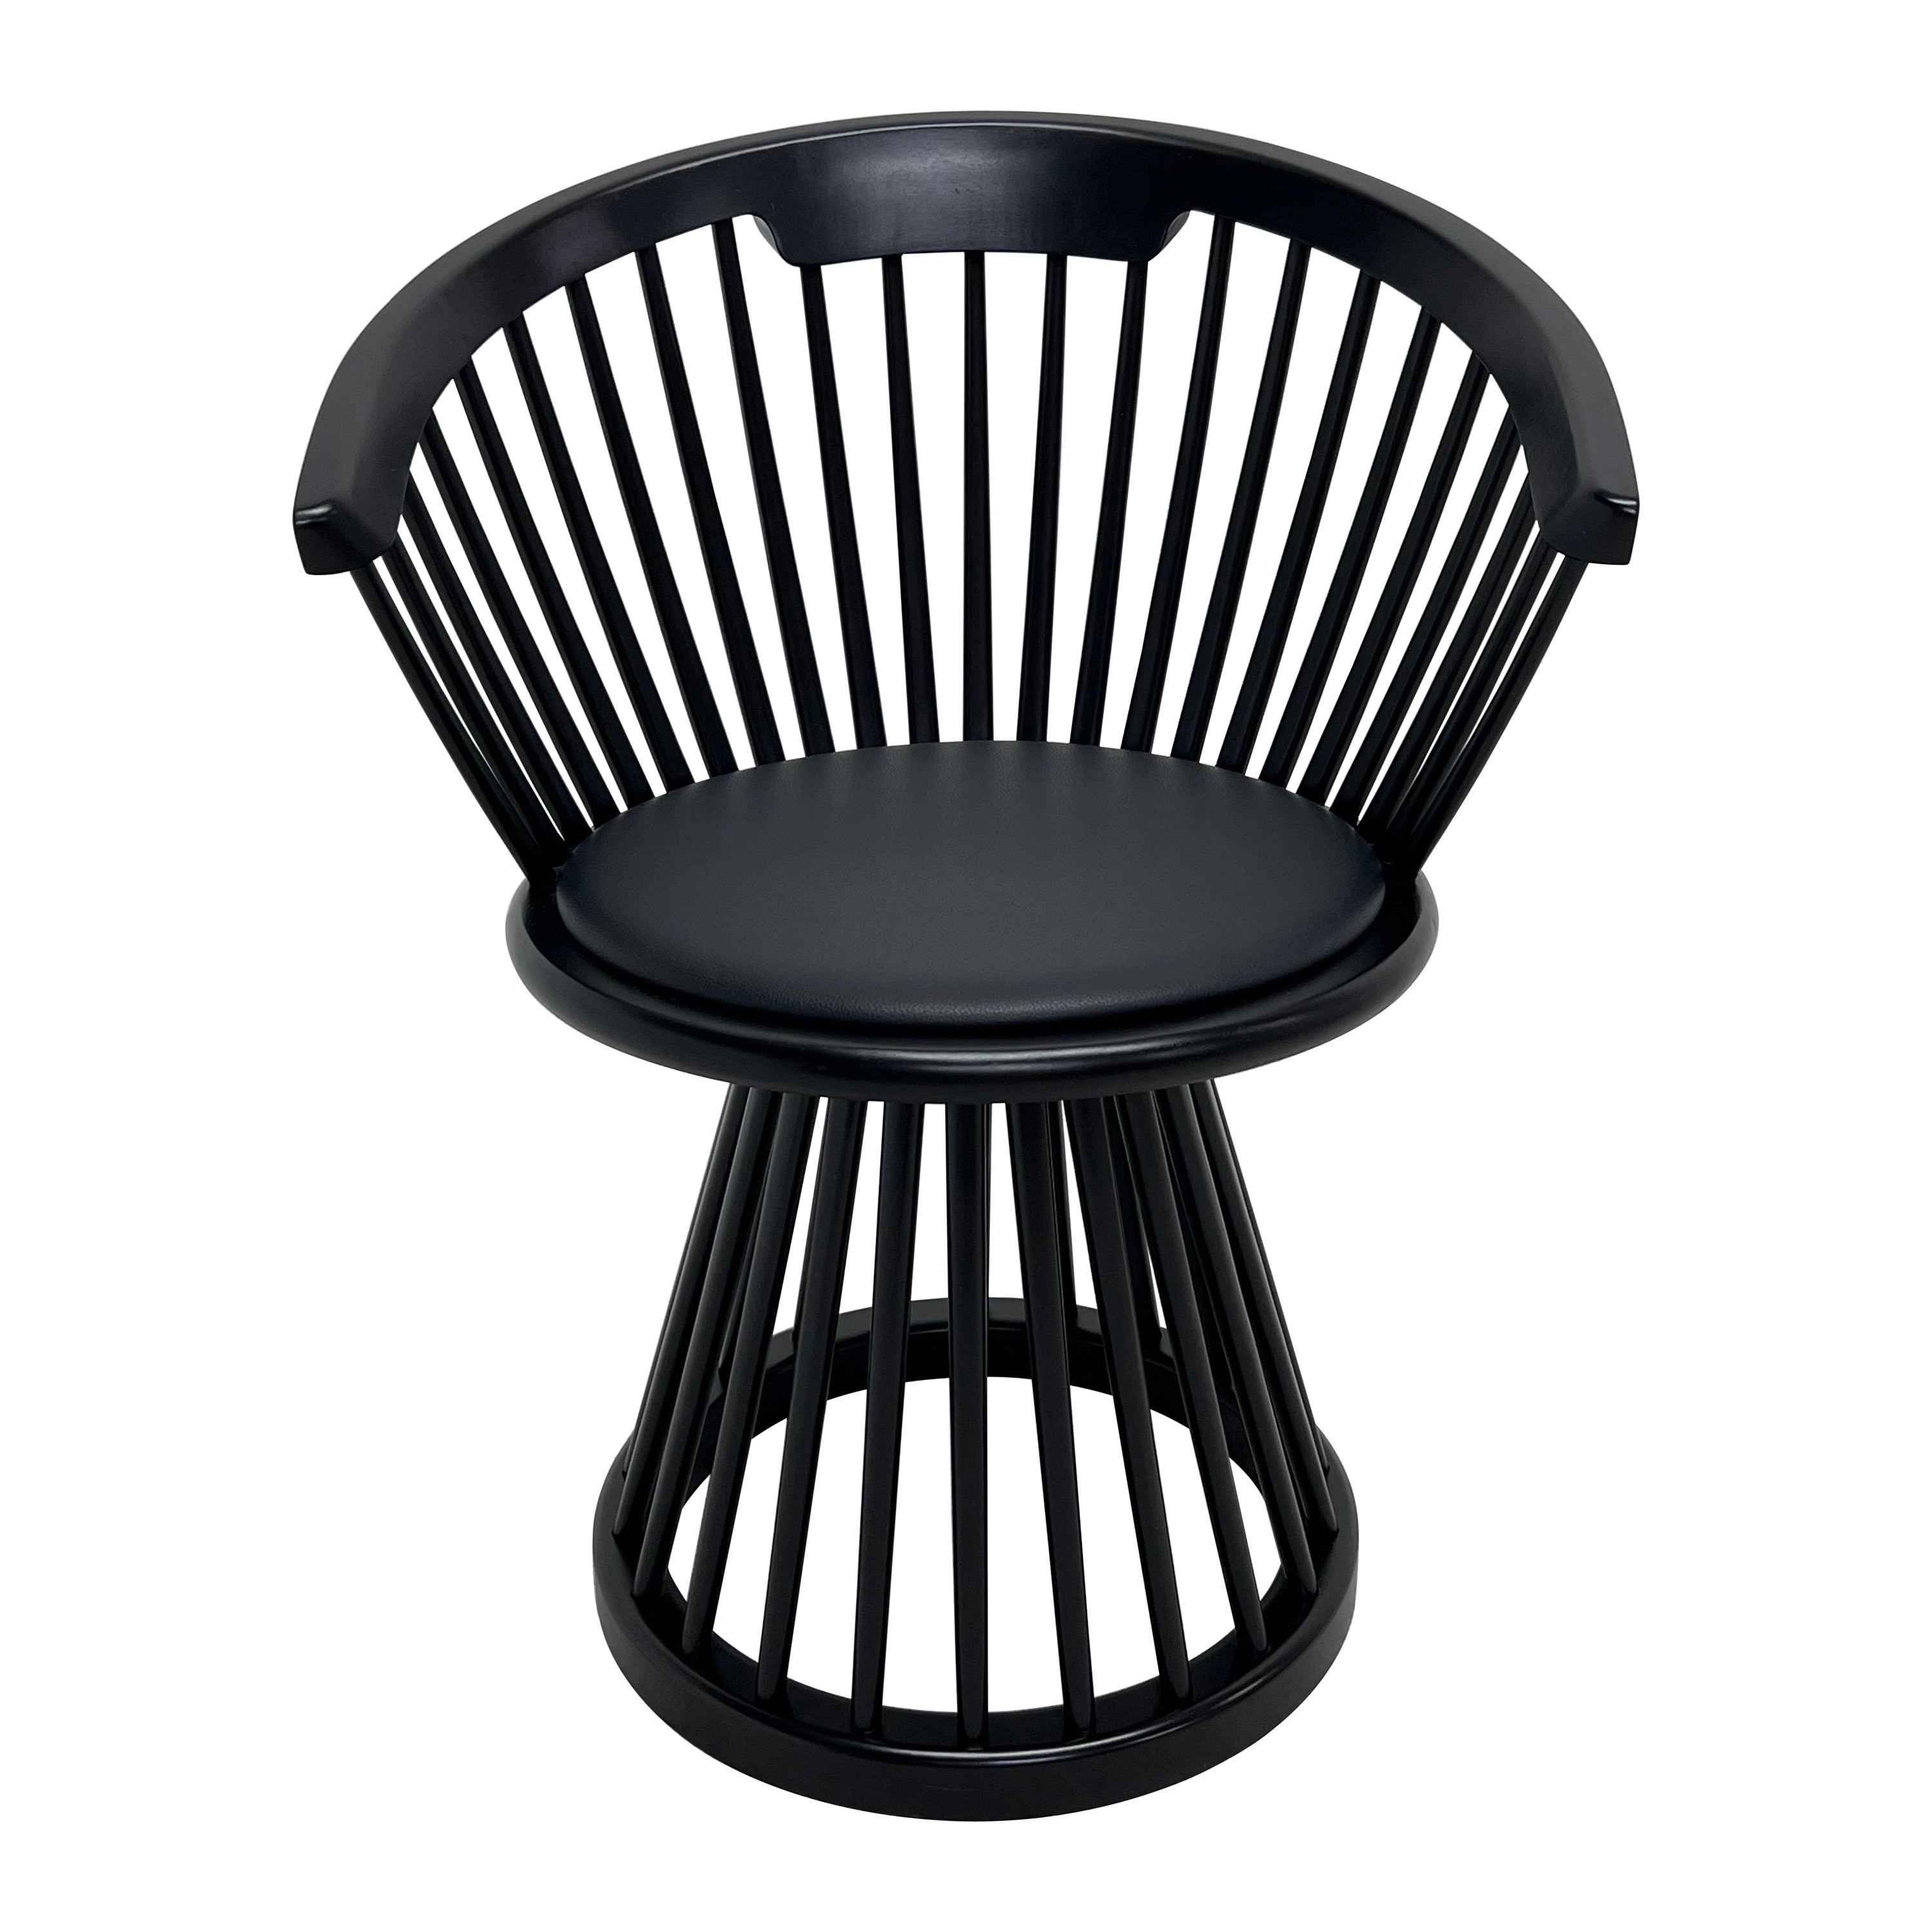 Tom Dixon Black Fan Dining Chair with Leather Seat Pad